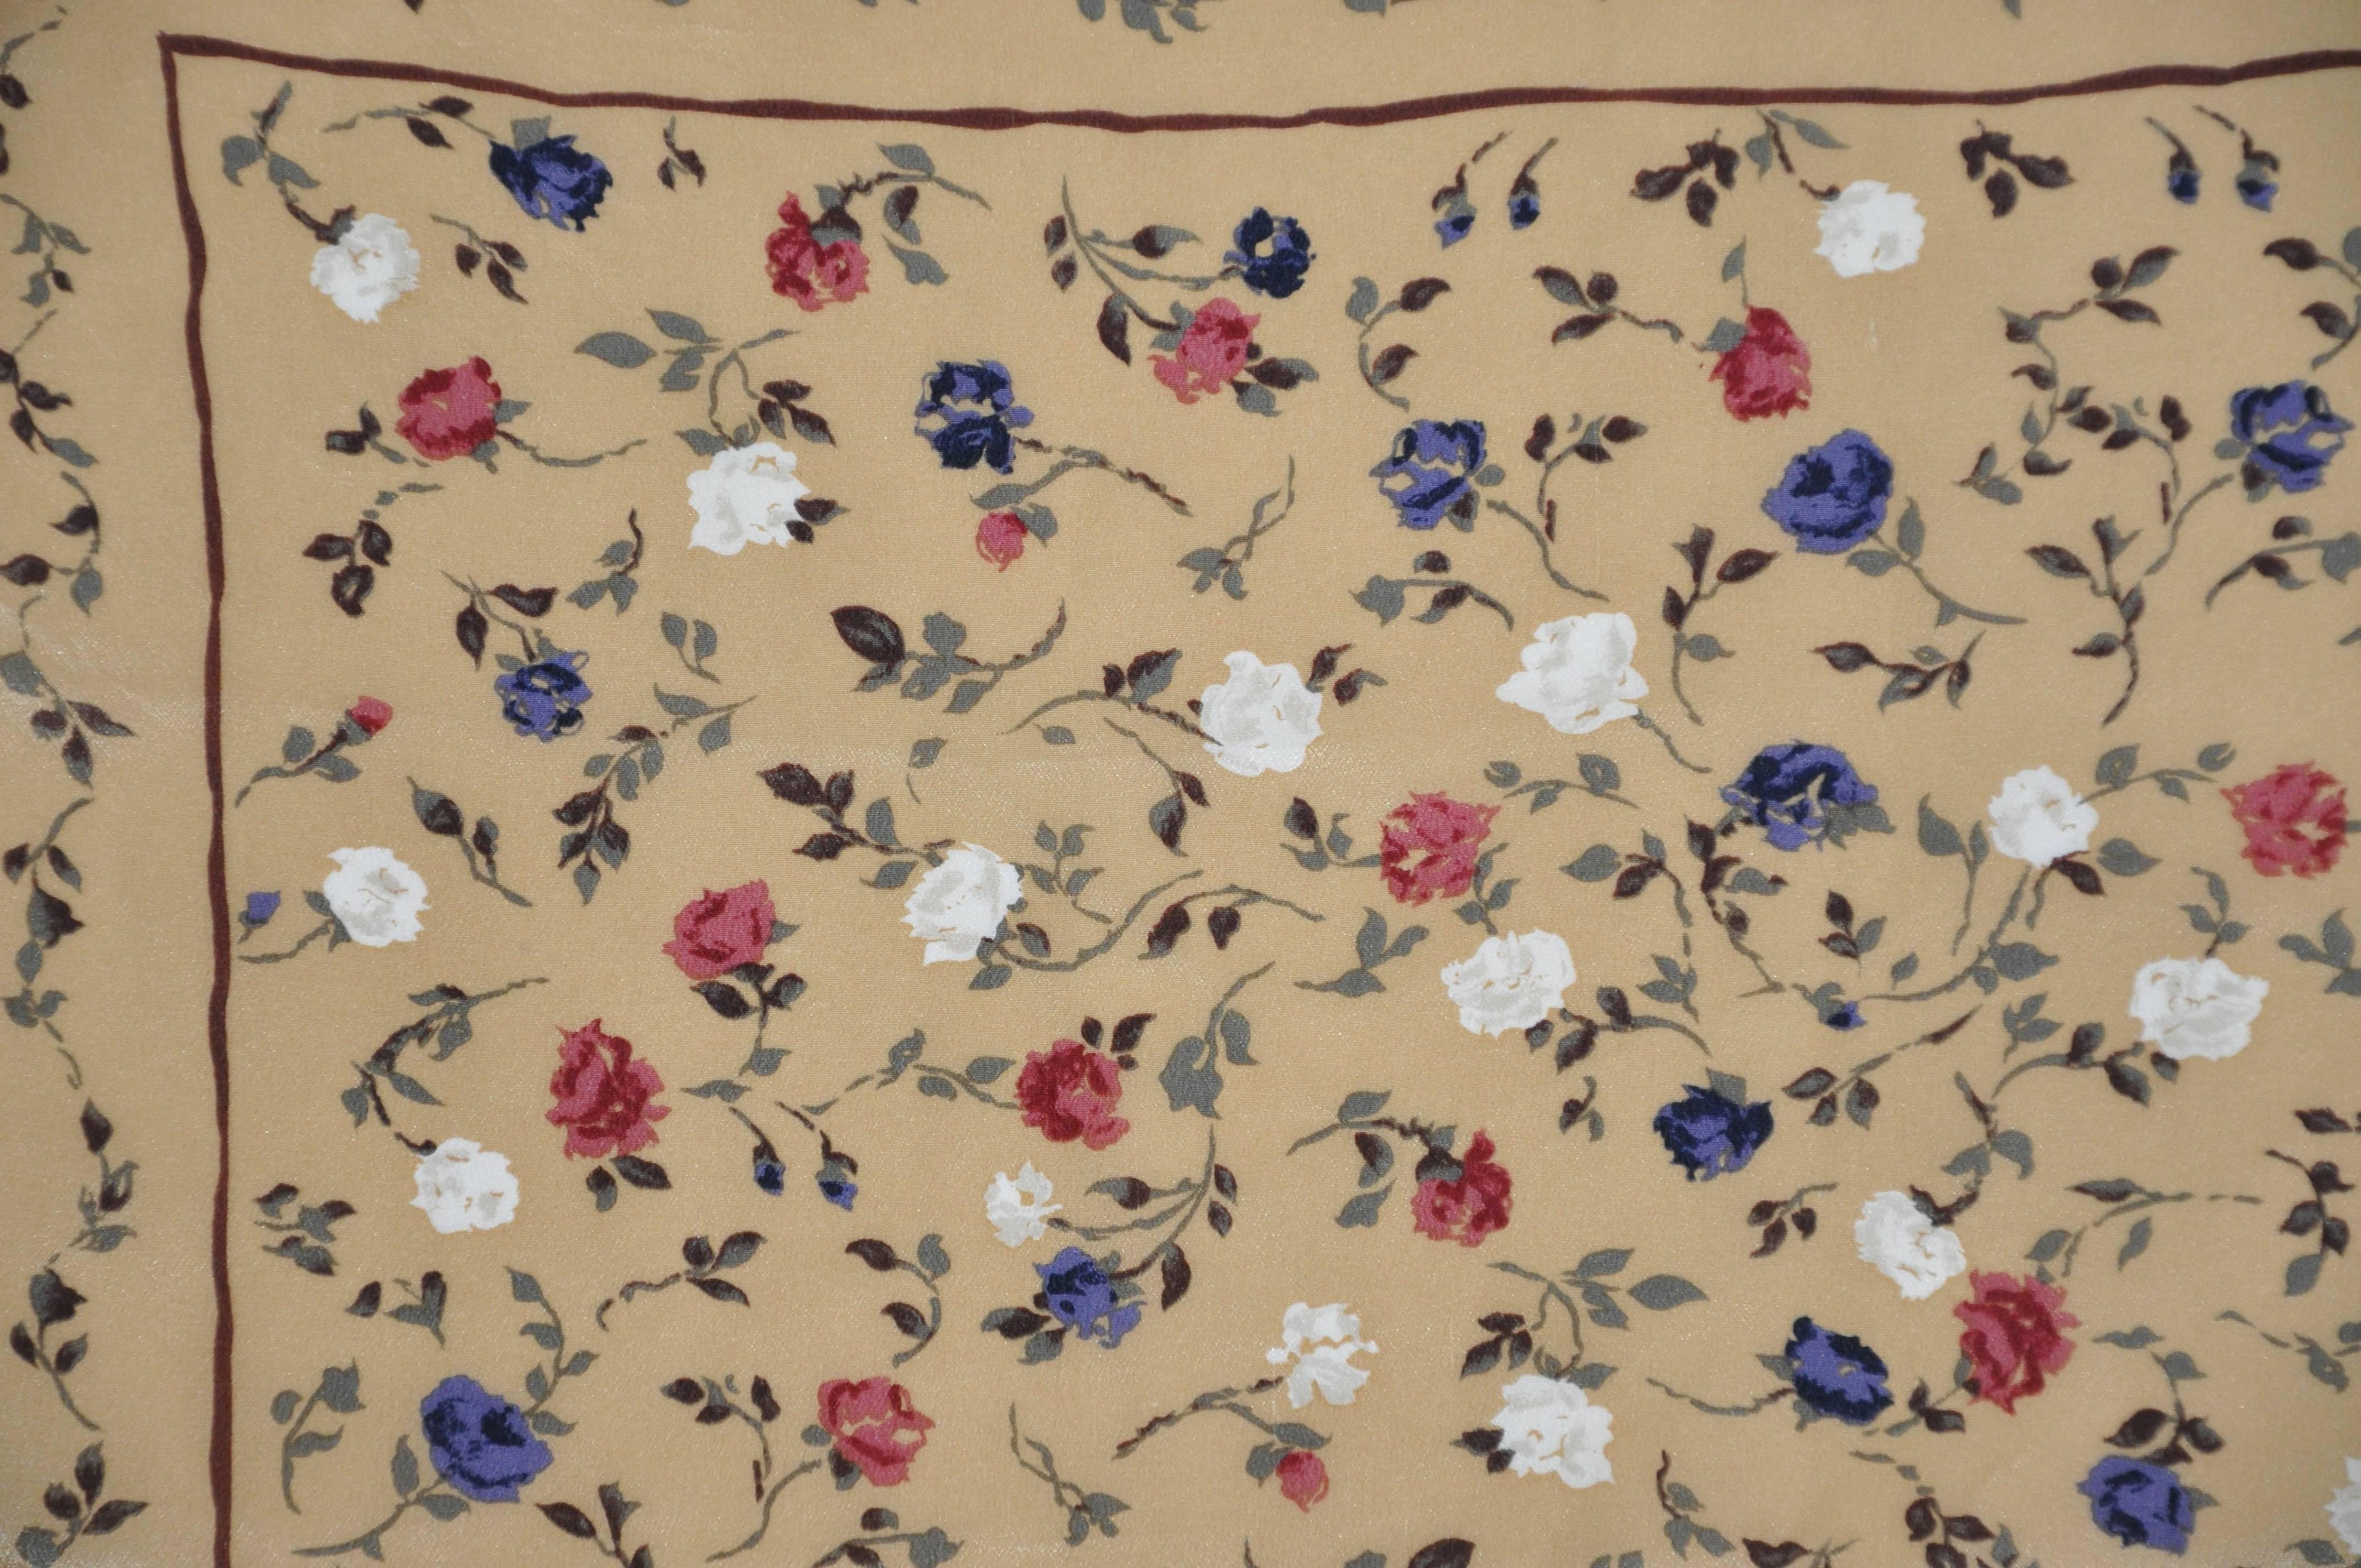      This wonderfully warm beige accented with multi-colors of floral silk handkerchief measures 18 1/2 inches by 19 inches. Made in Italy.